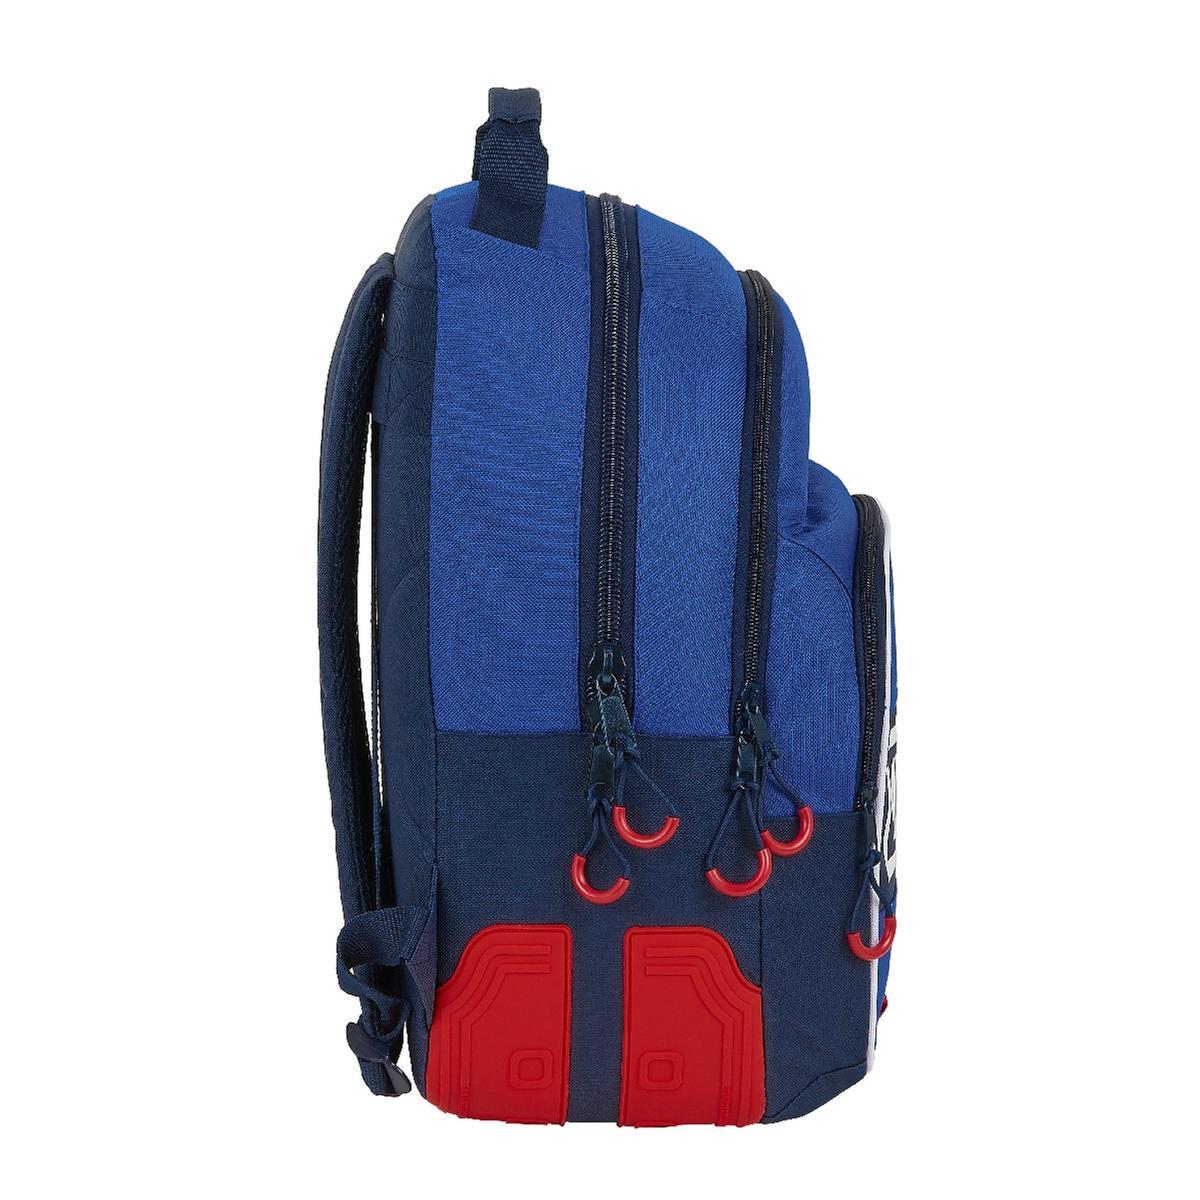 Hot Topic Marvel Spider-Man Pull Tab Backpack